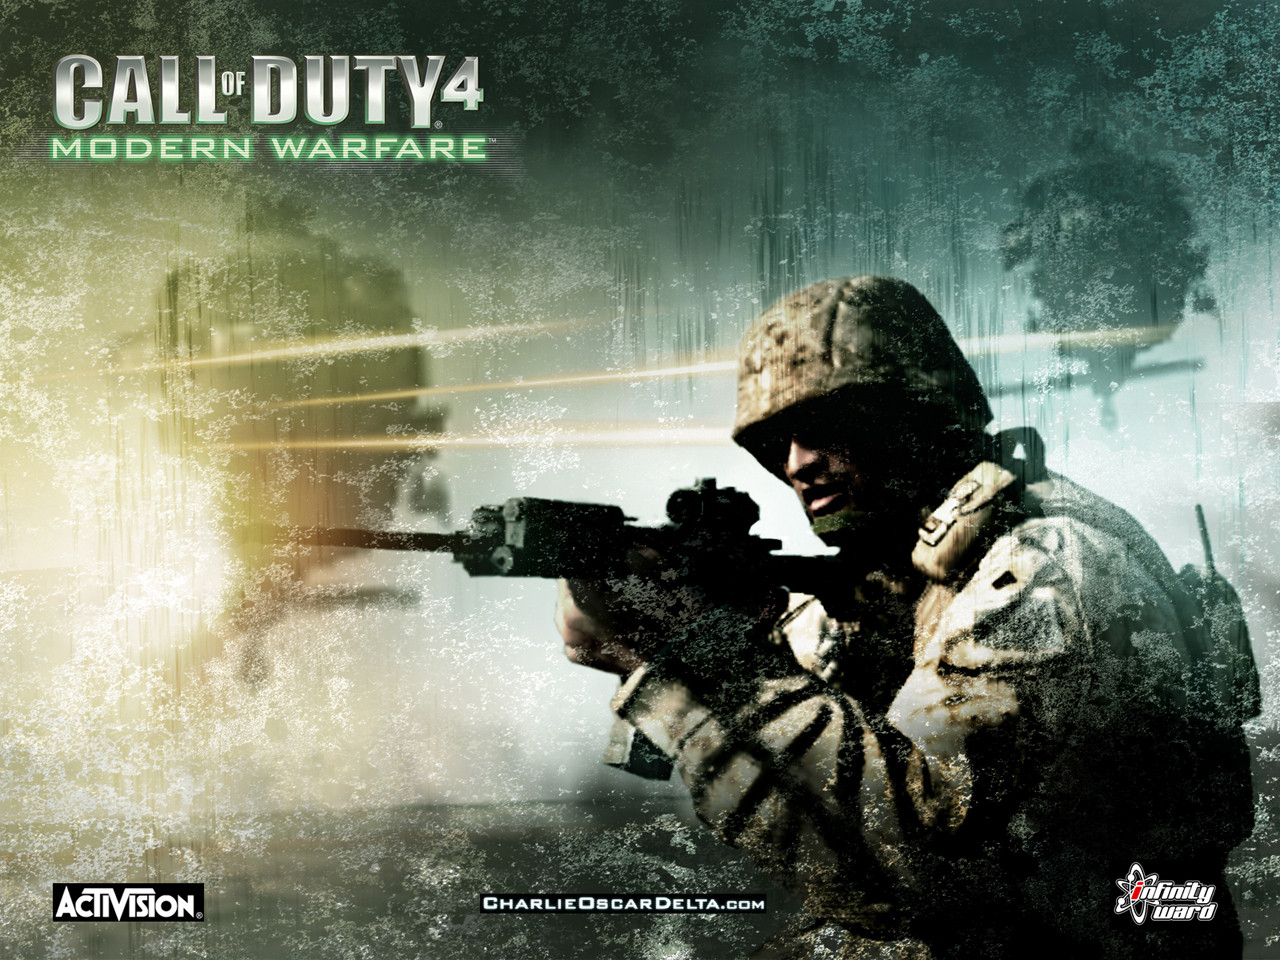 CoD4 Central | CoD4 Wallpapers | Call of Duty 4 Remaster